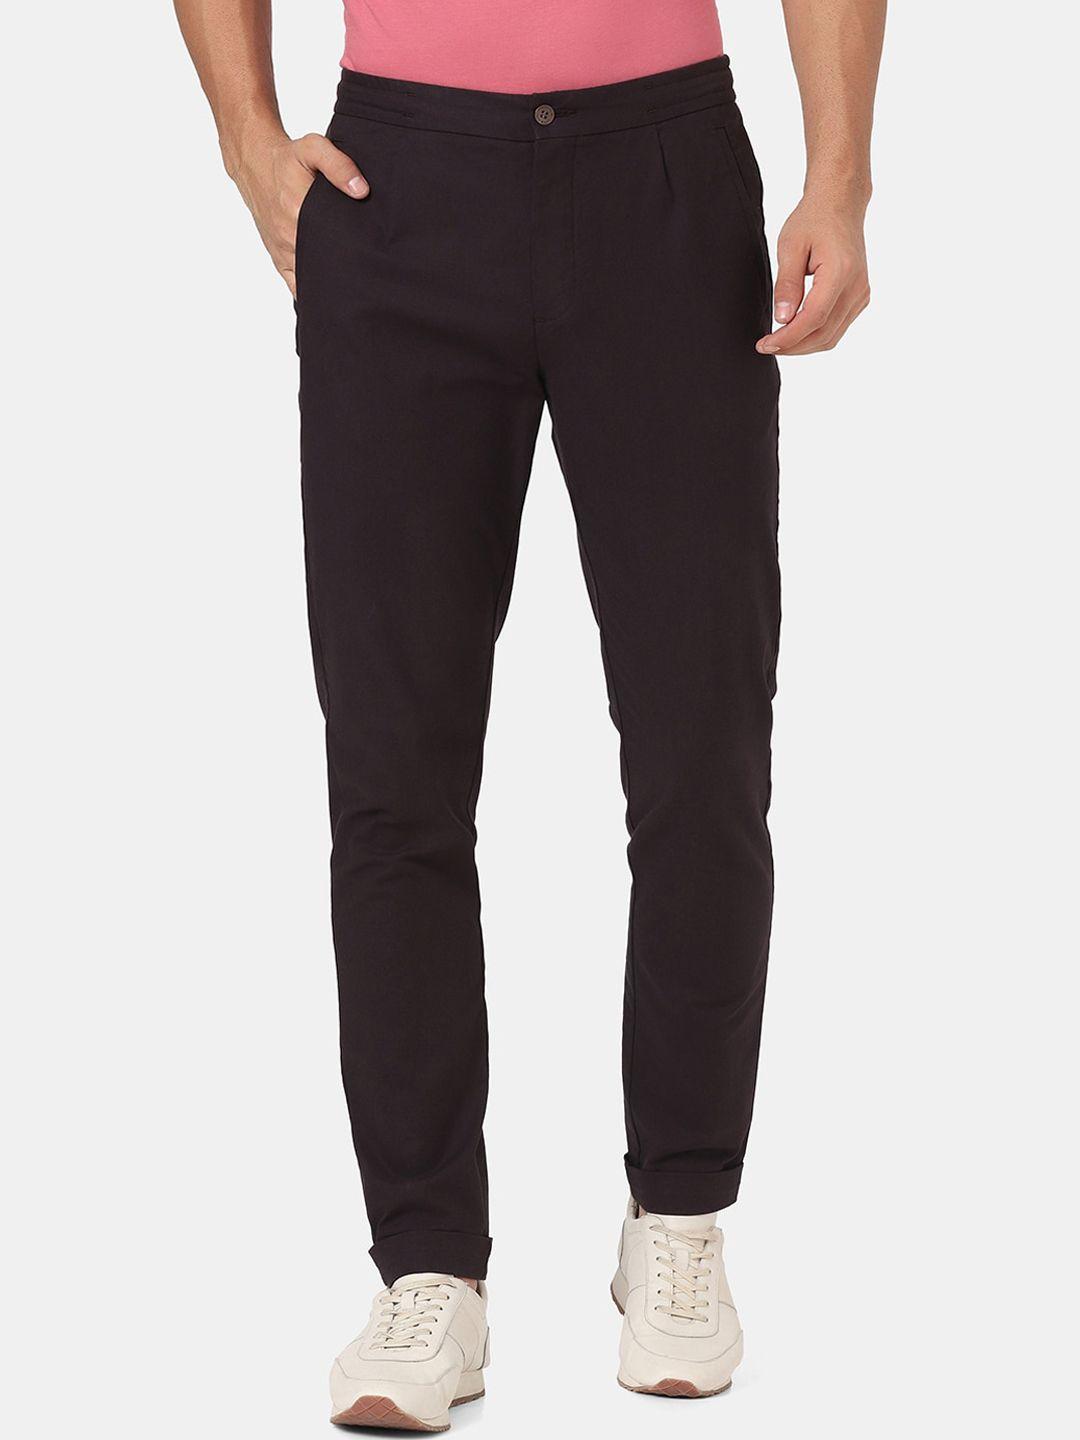 blackberrys-men-red-skinny-fit-low-rise-chinos-trousers